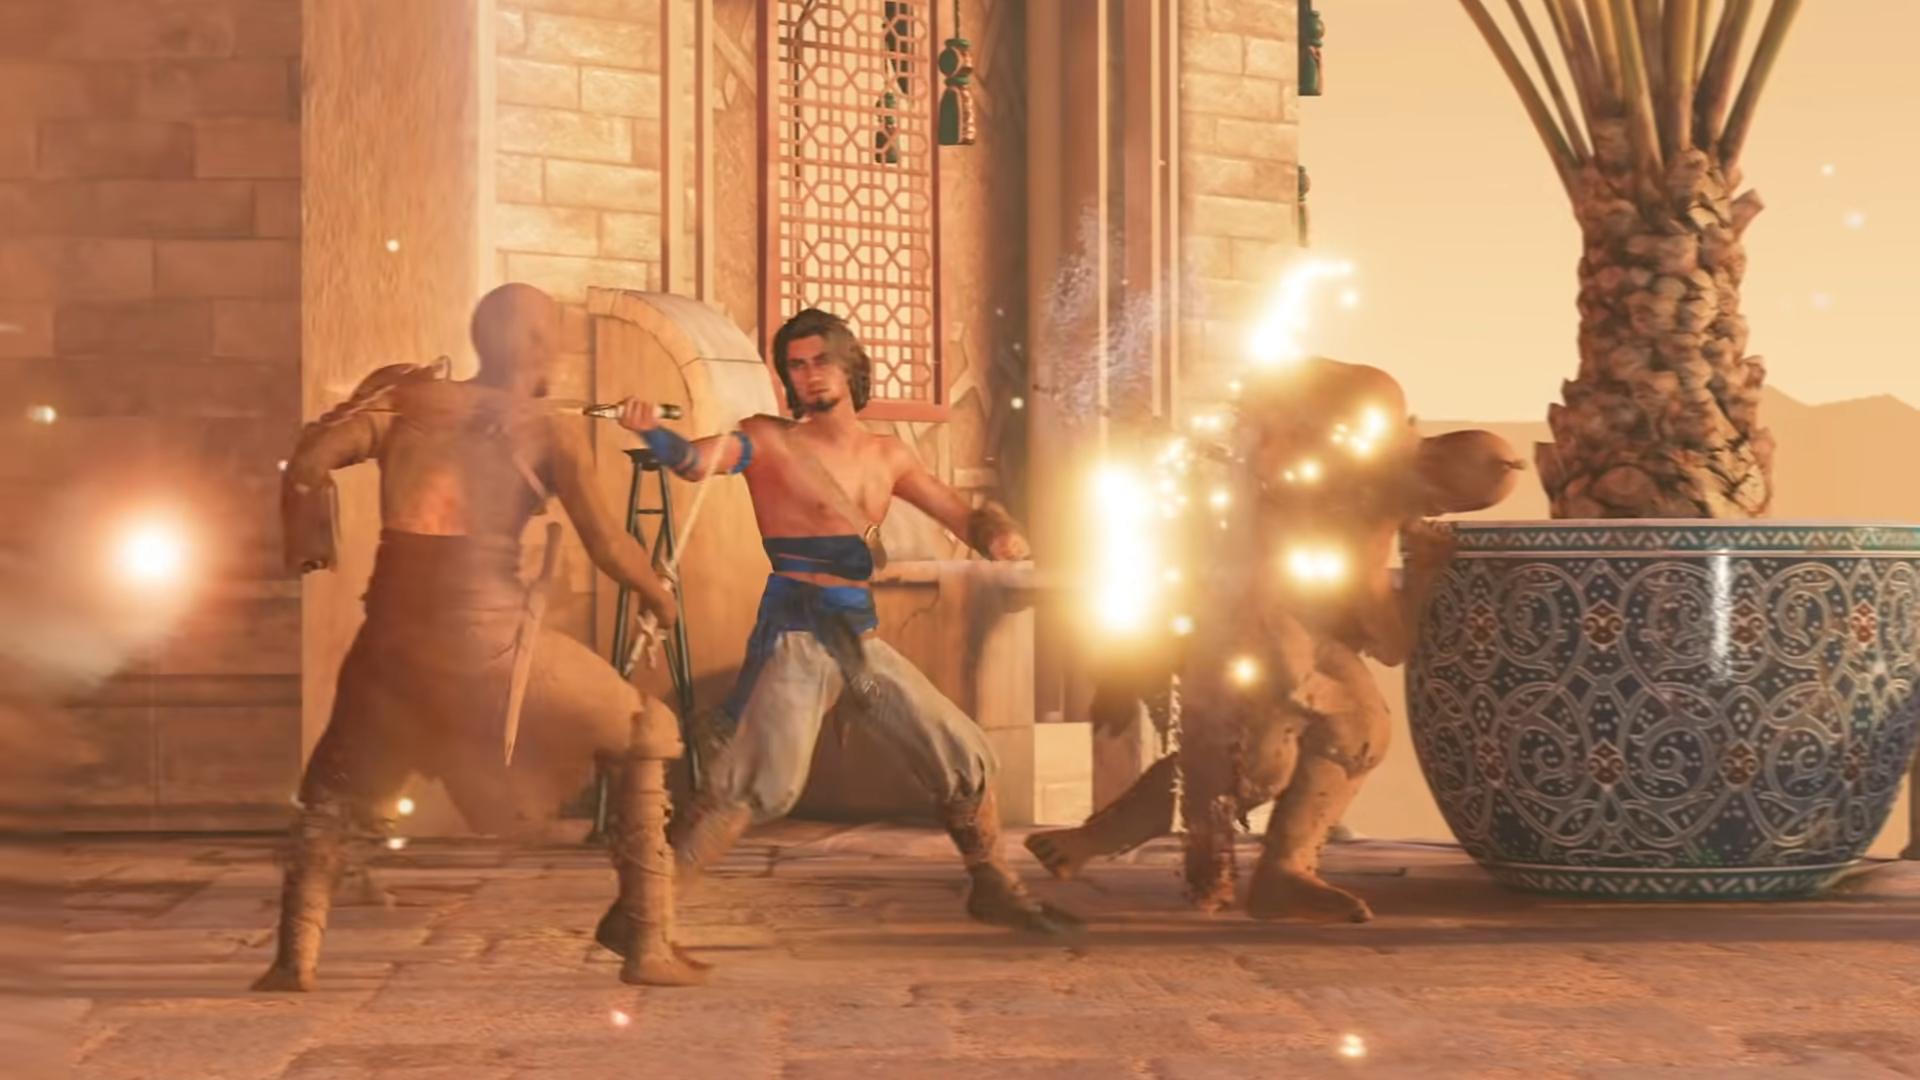 Where was Prince of Persia: The Sands of Time Remake at E3 2021?